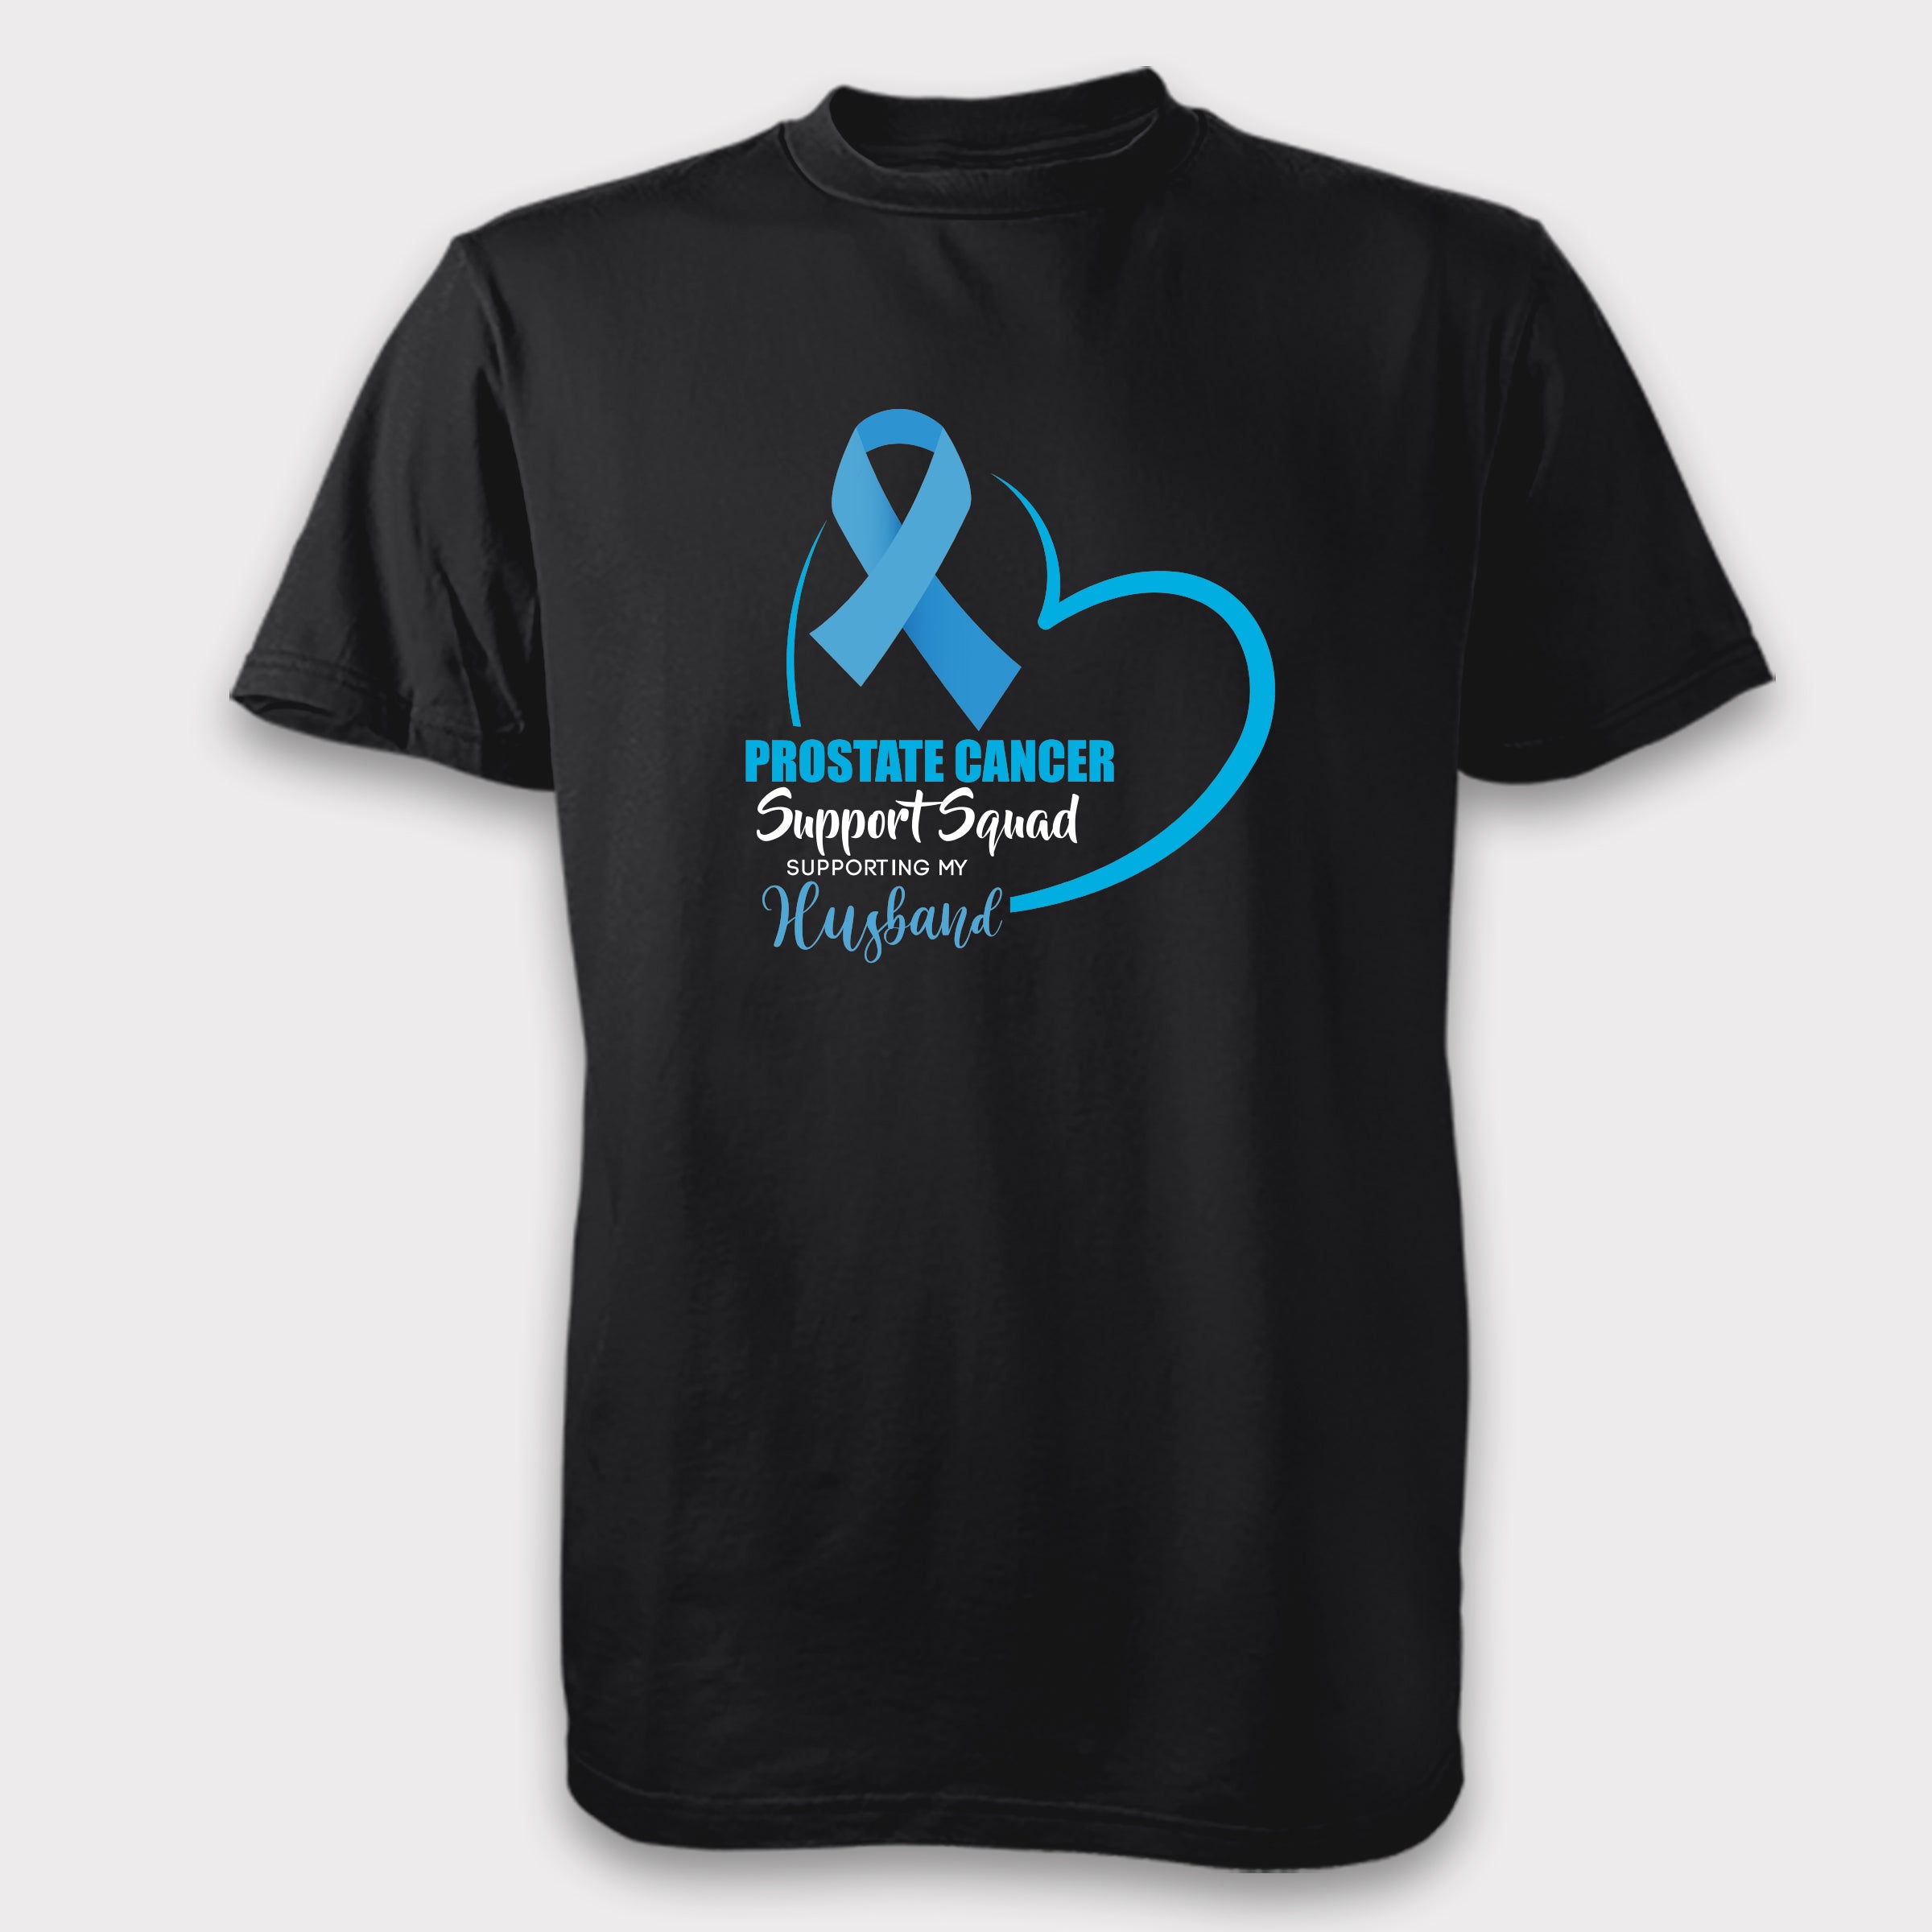 Prostate Cancer Support Squad  - Husband Tee